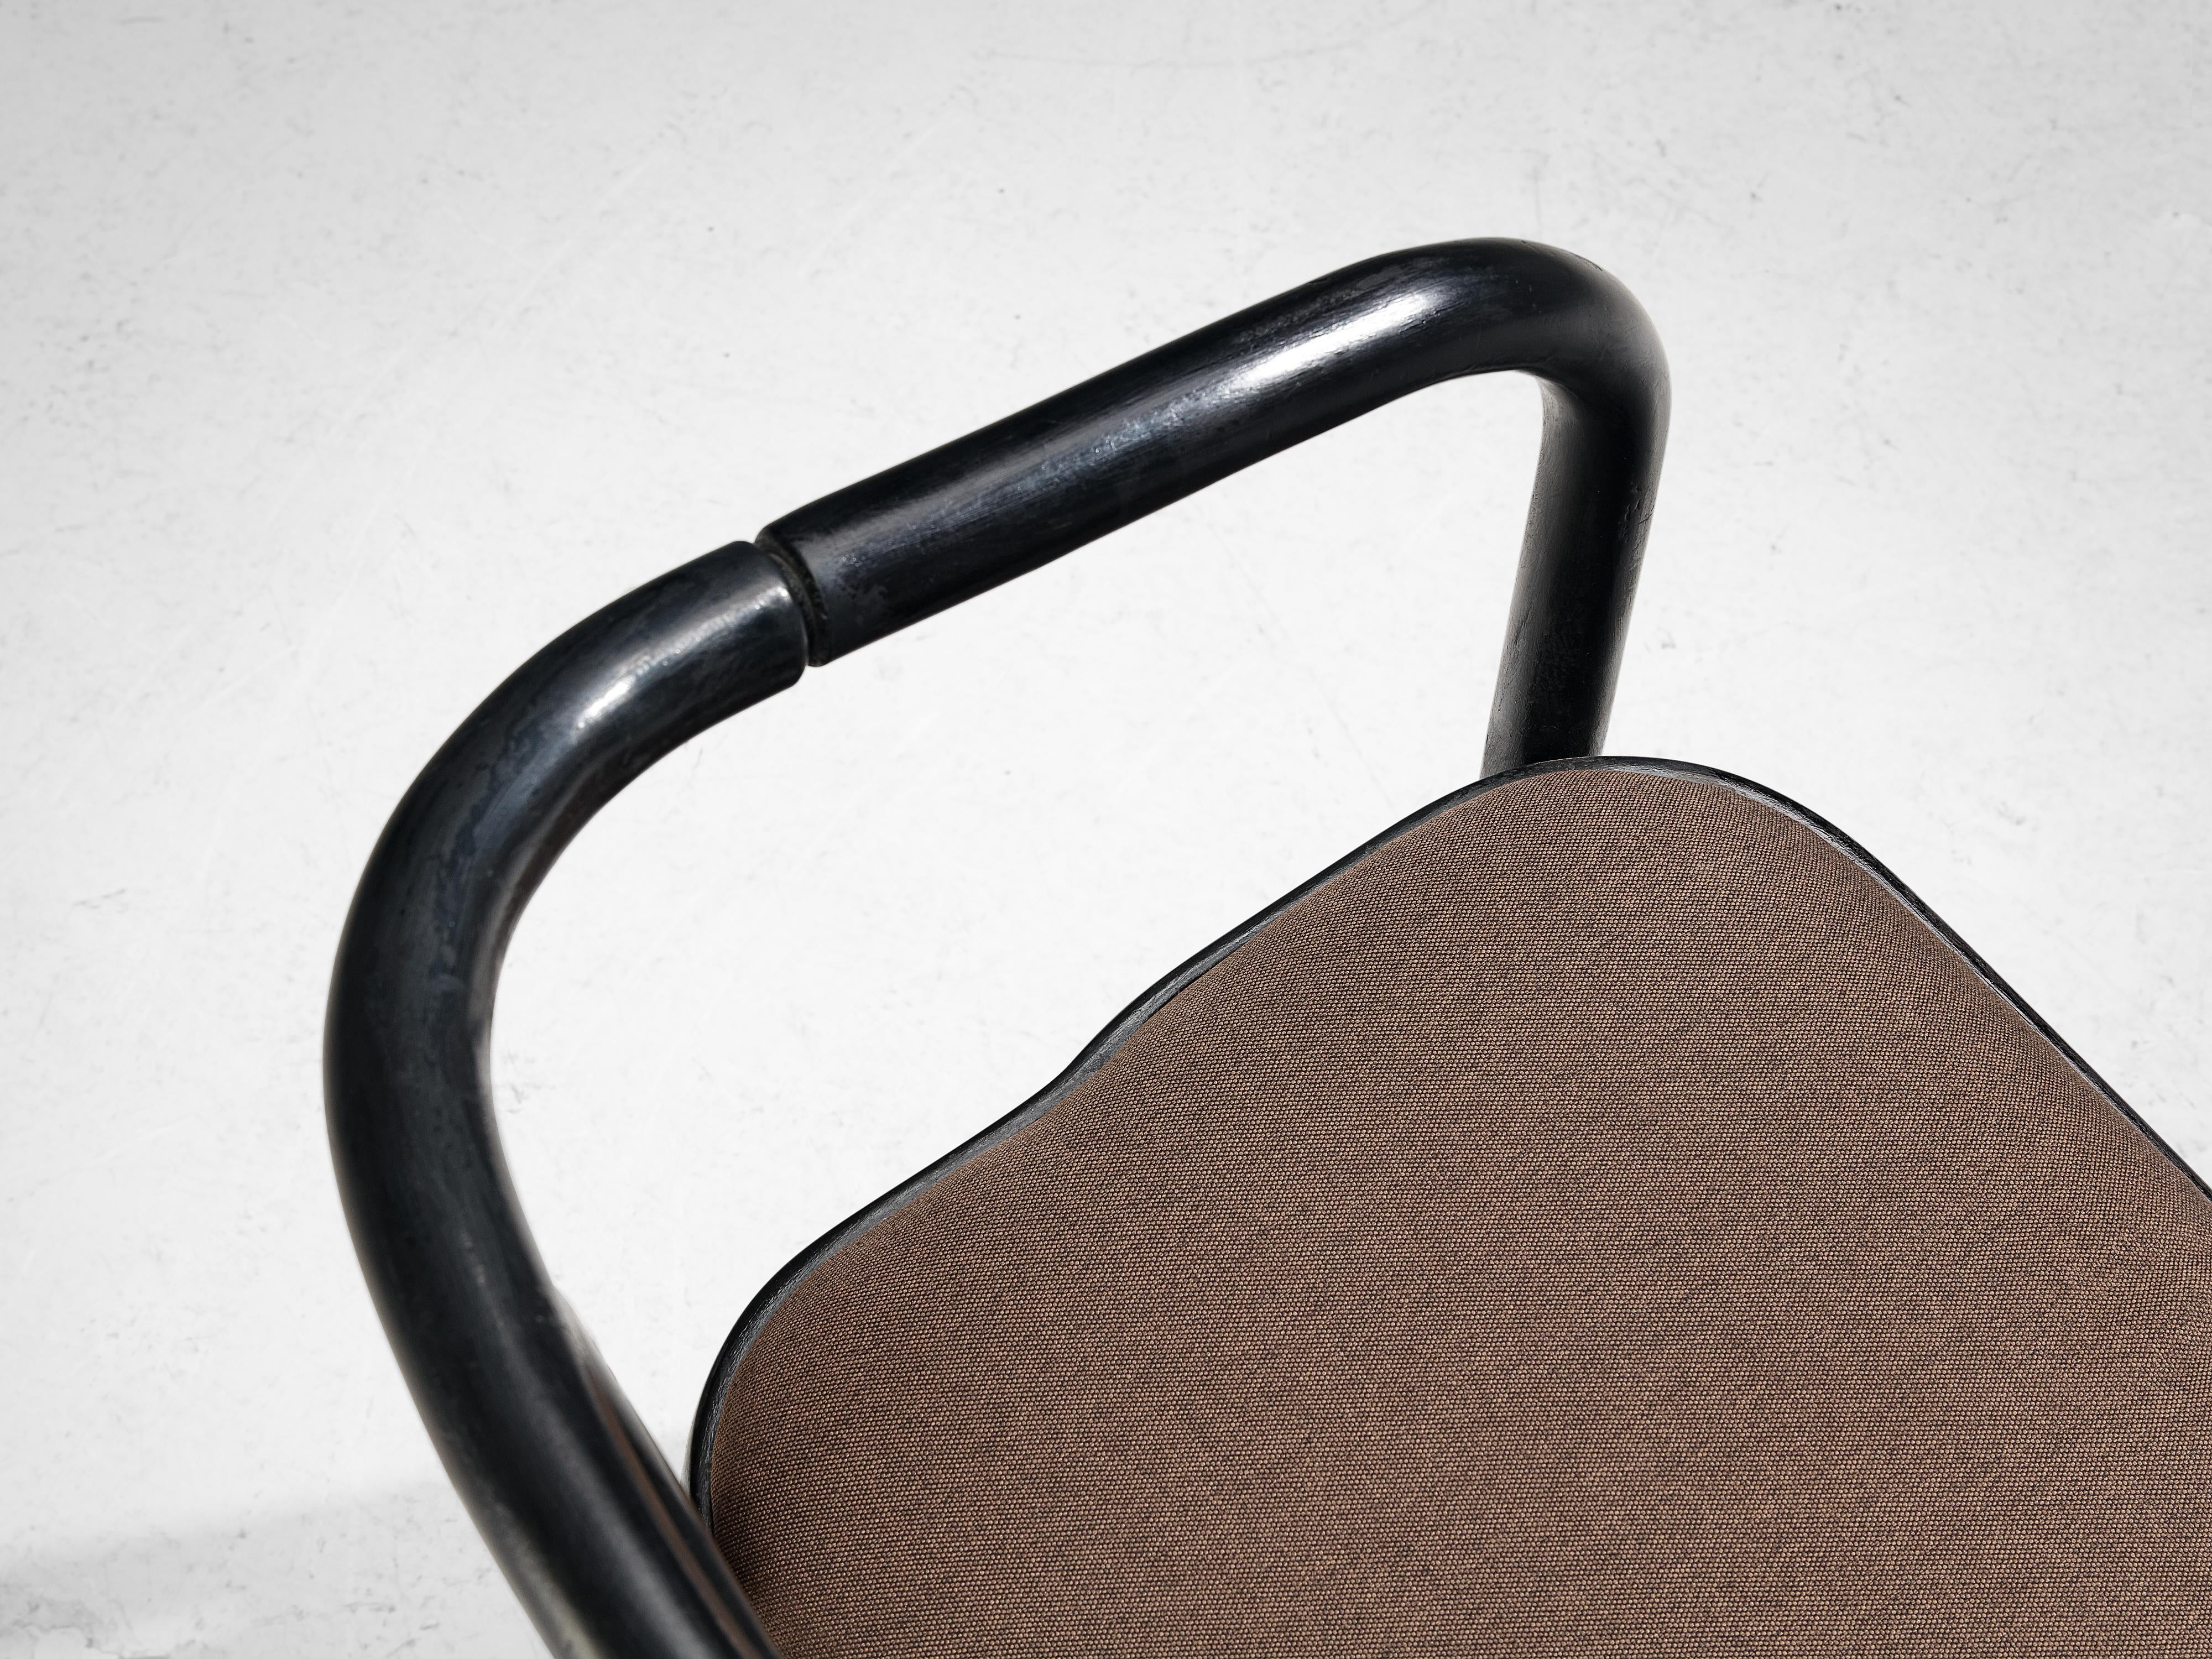 Antonin Suman for TON Armchairs in Black Lacquered Wood